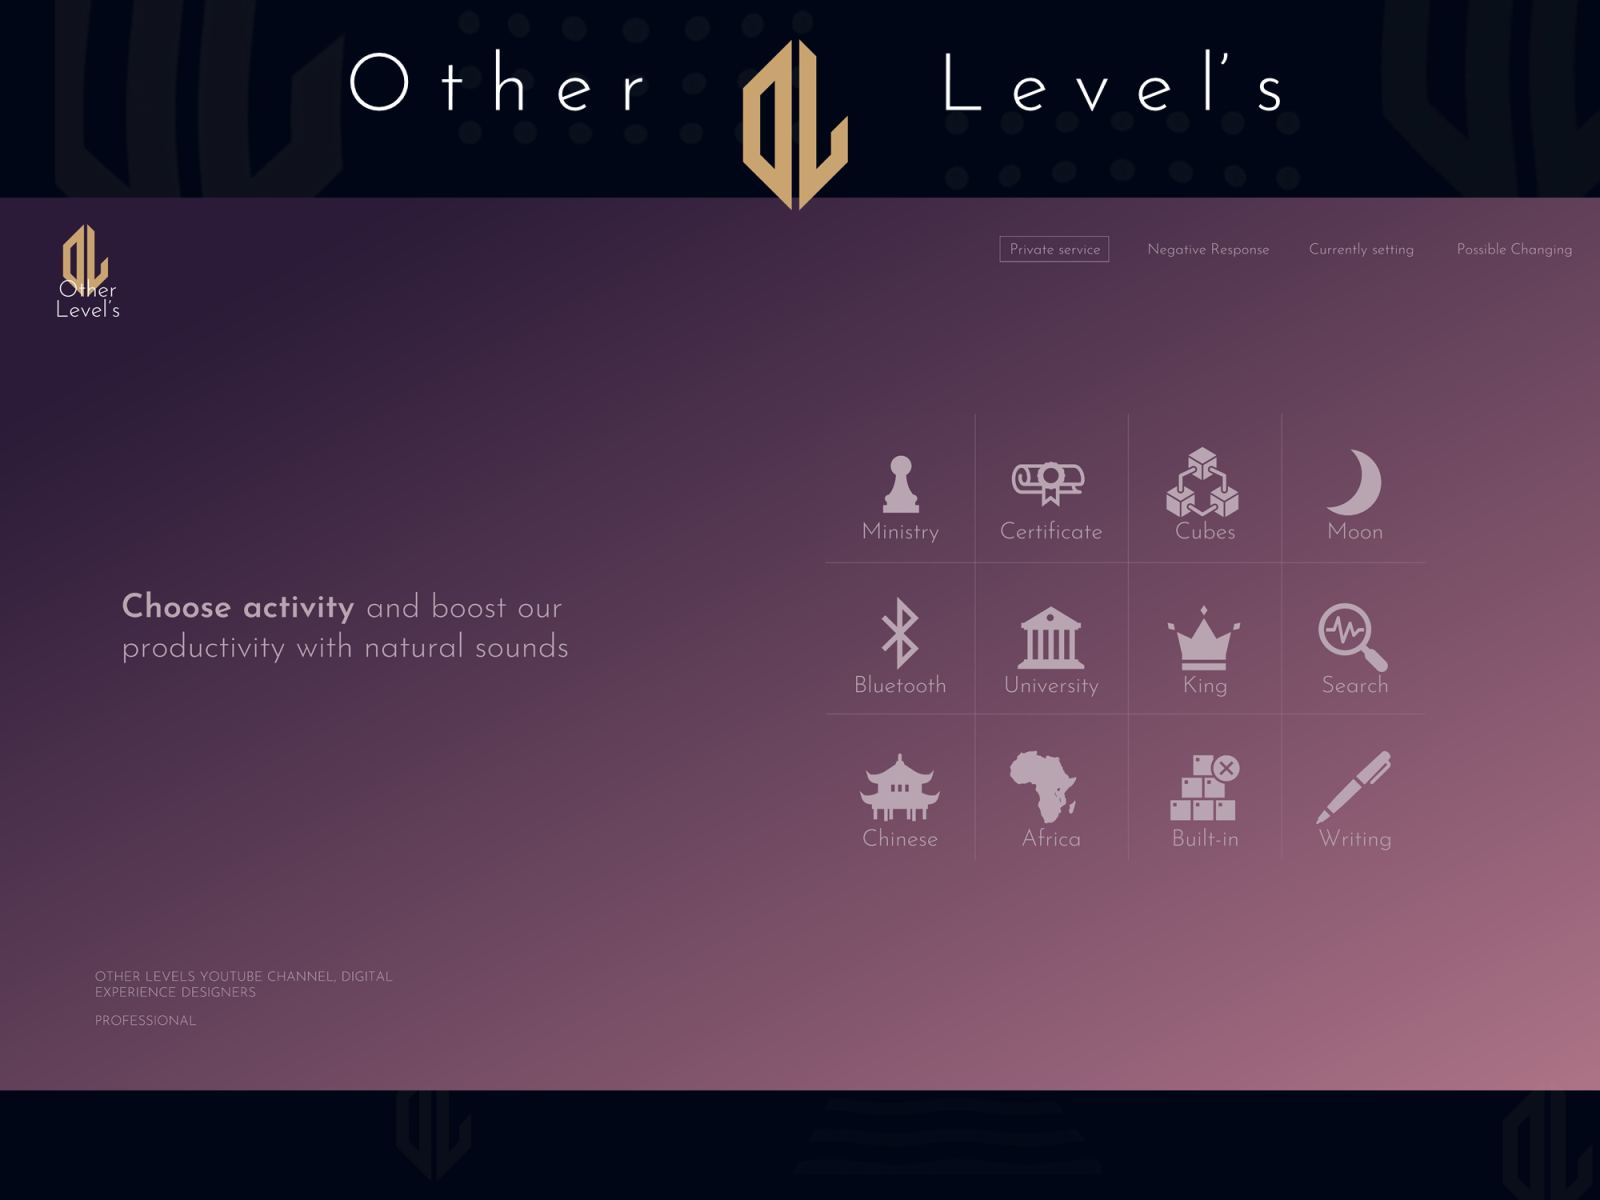 PowerPoint Slide by Other Level's on Dribbble